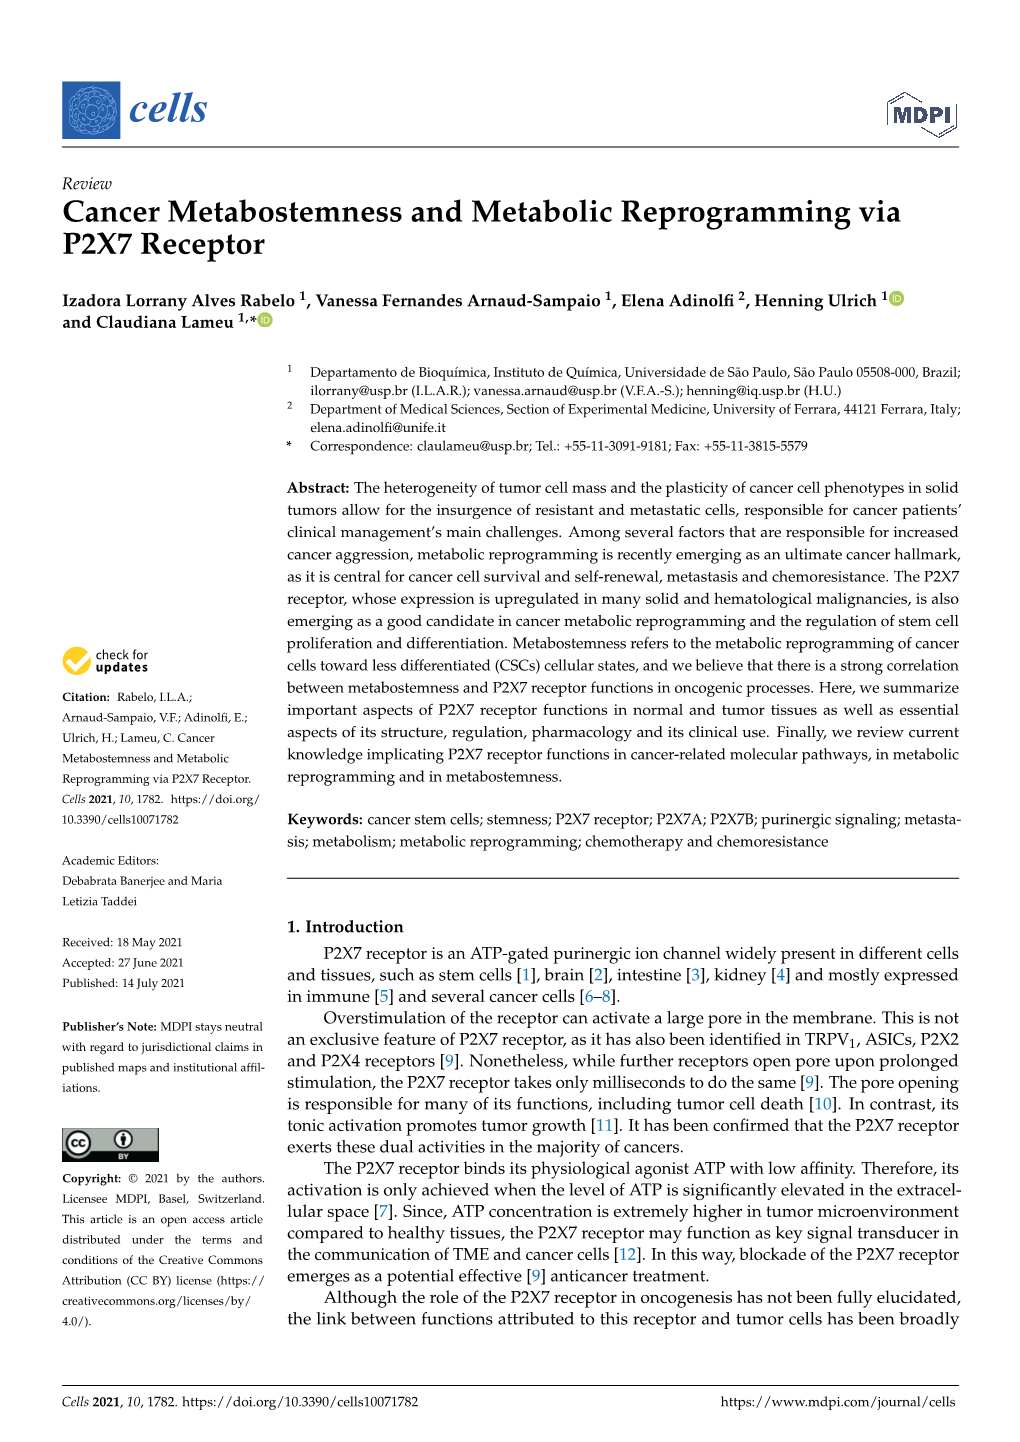 Cancer Metabostemness and Metabolic Reprogramming Via P2X7 Receptor